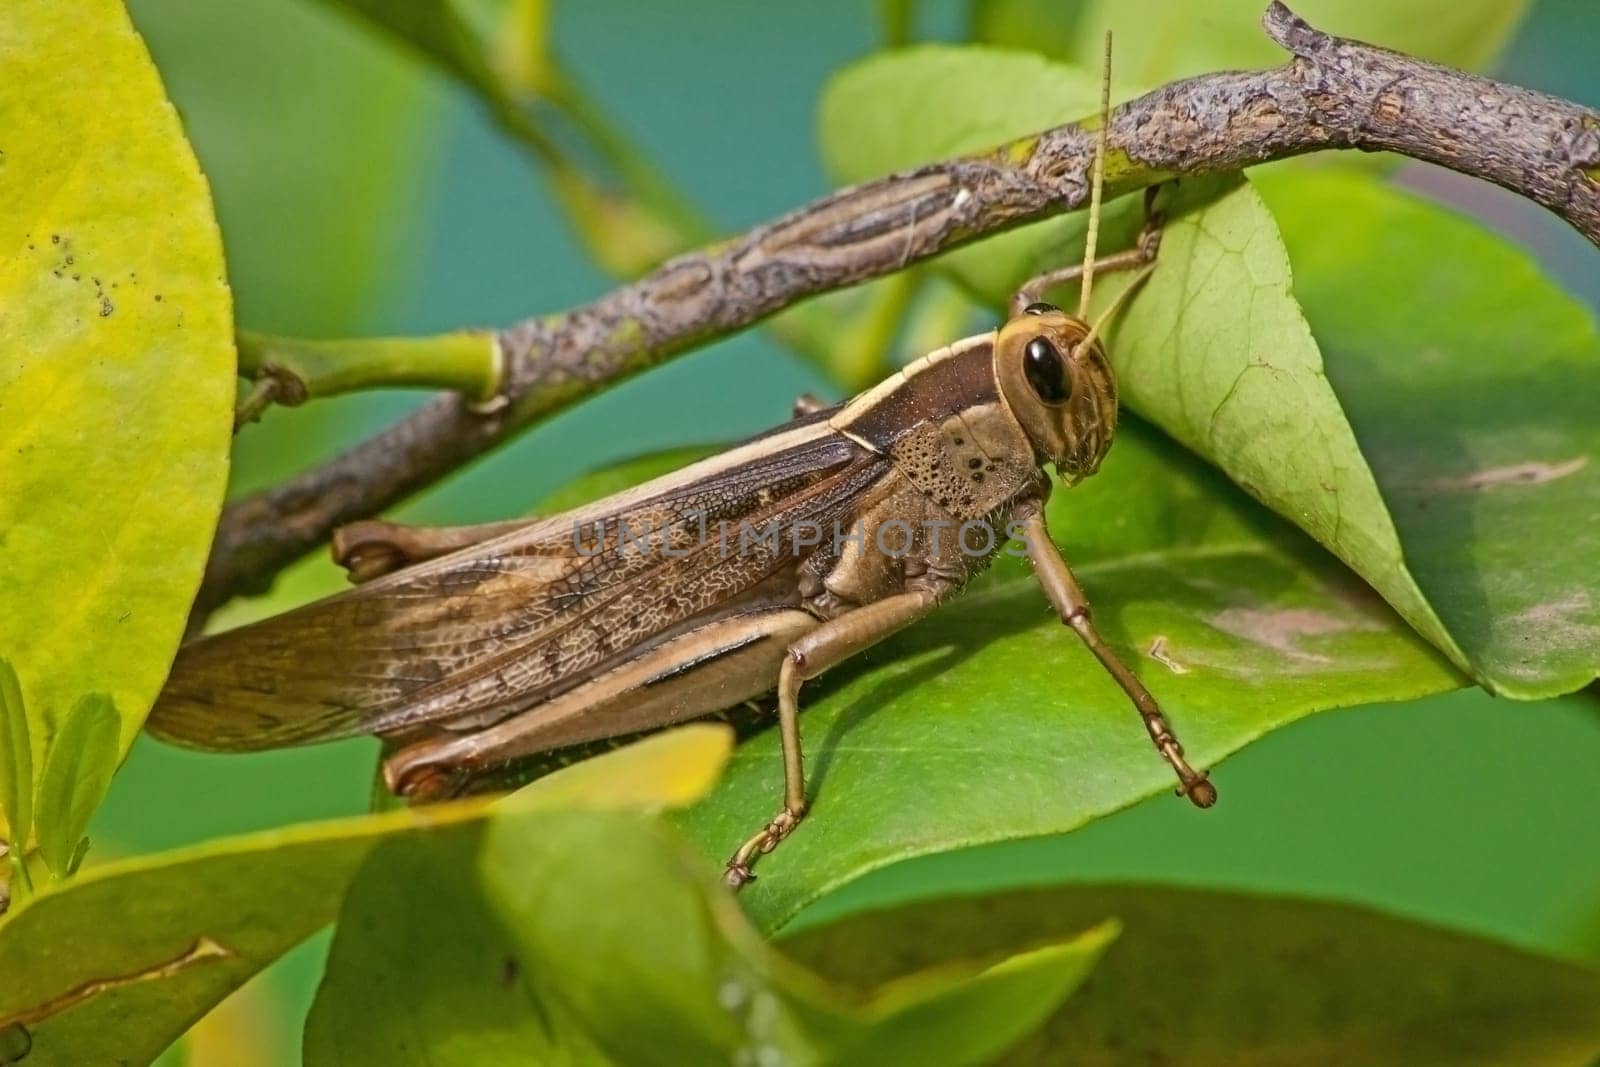 Cyrtacanthacris aeruginosa is a large species of grasshopper found in the African grasslands